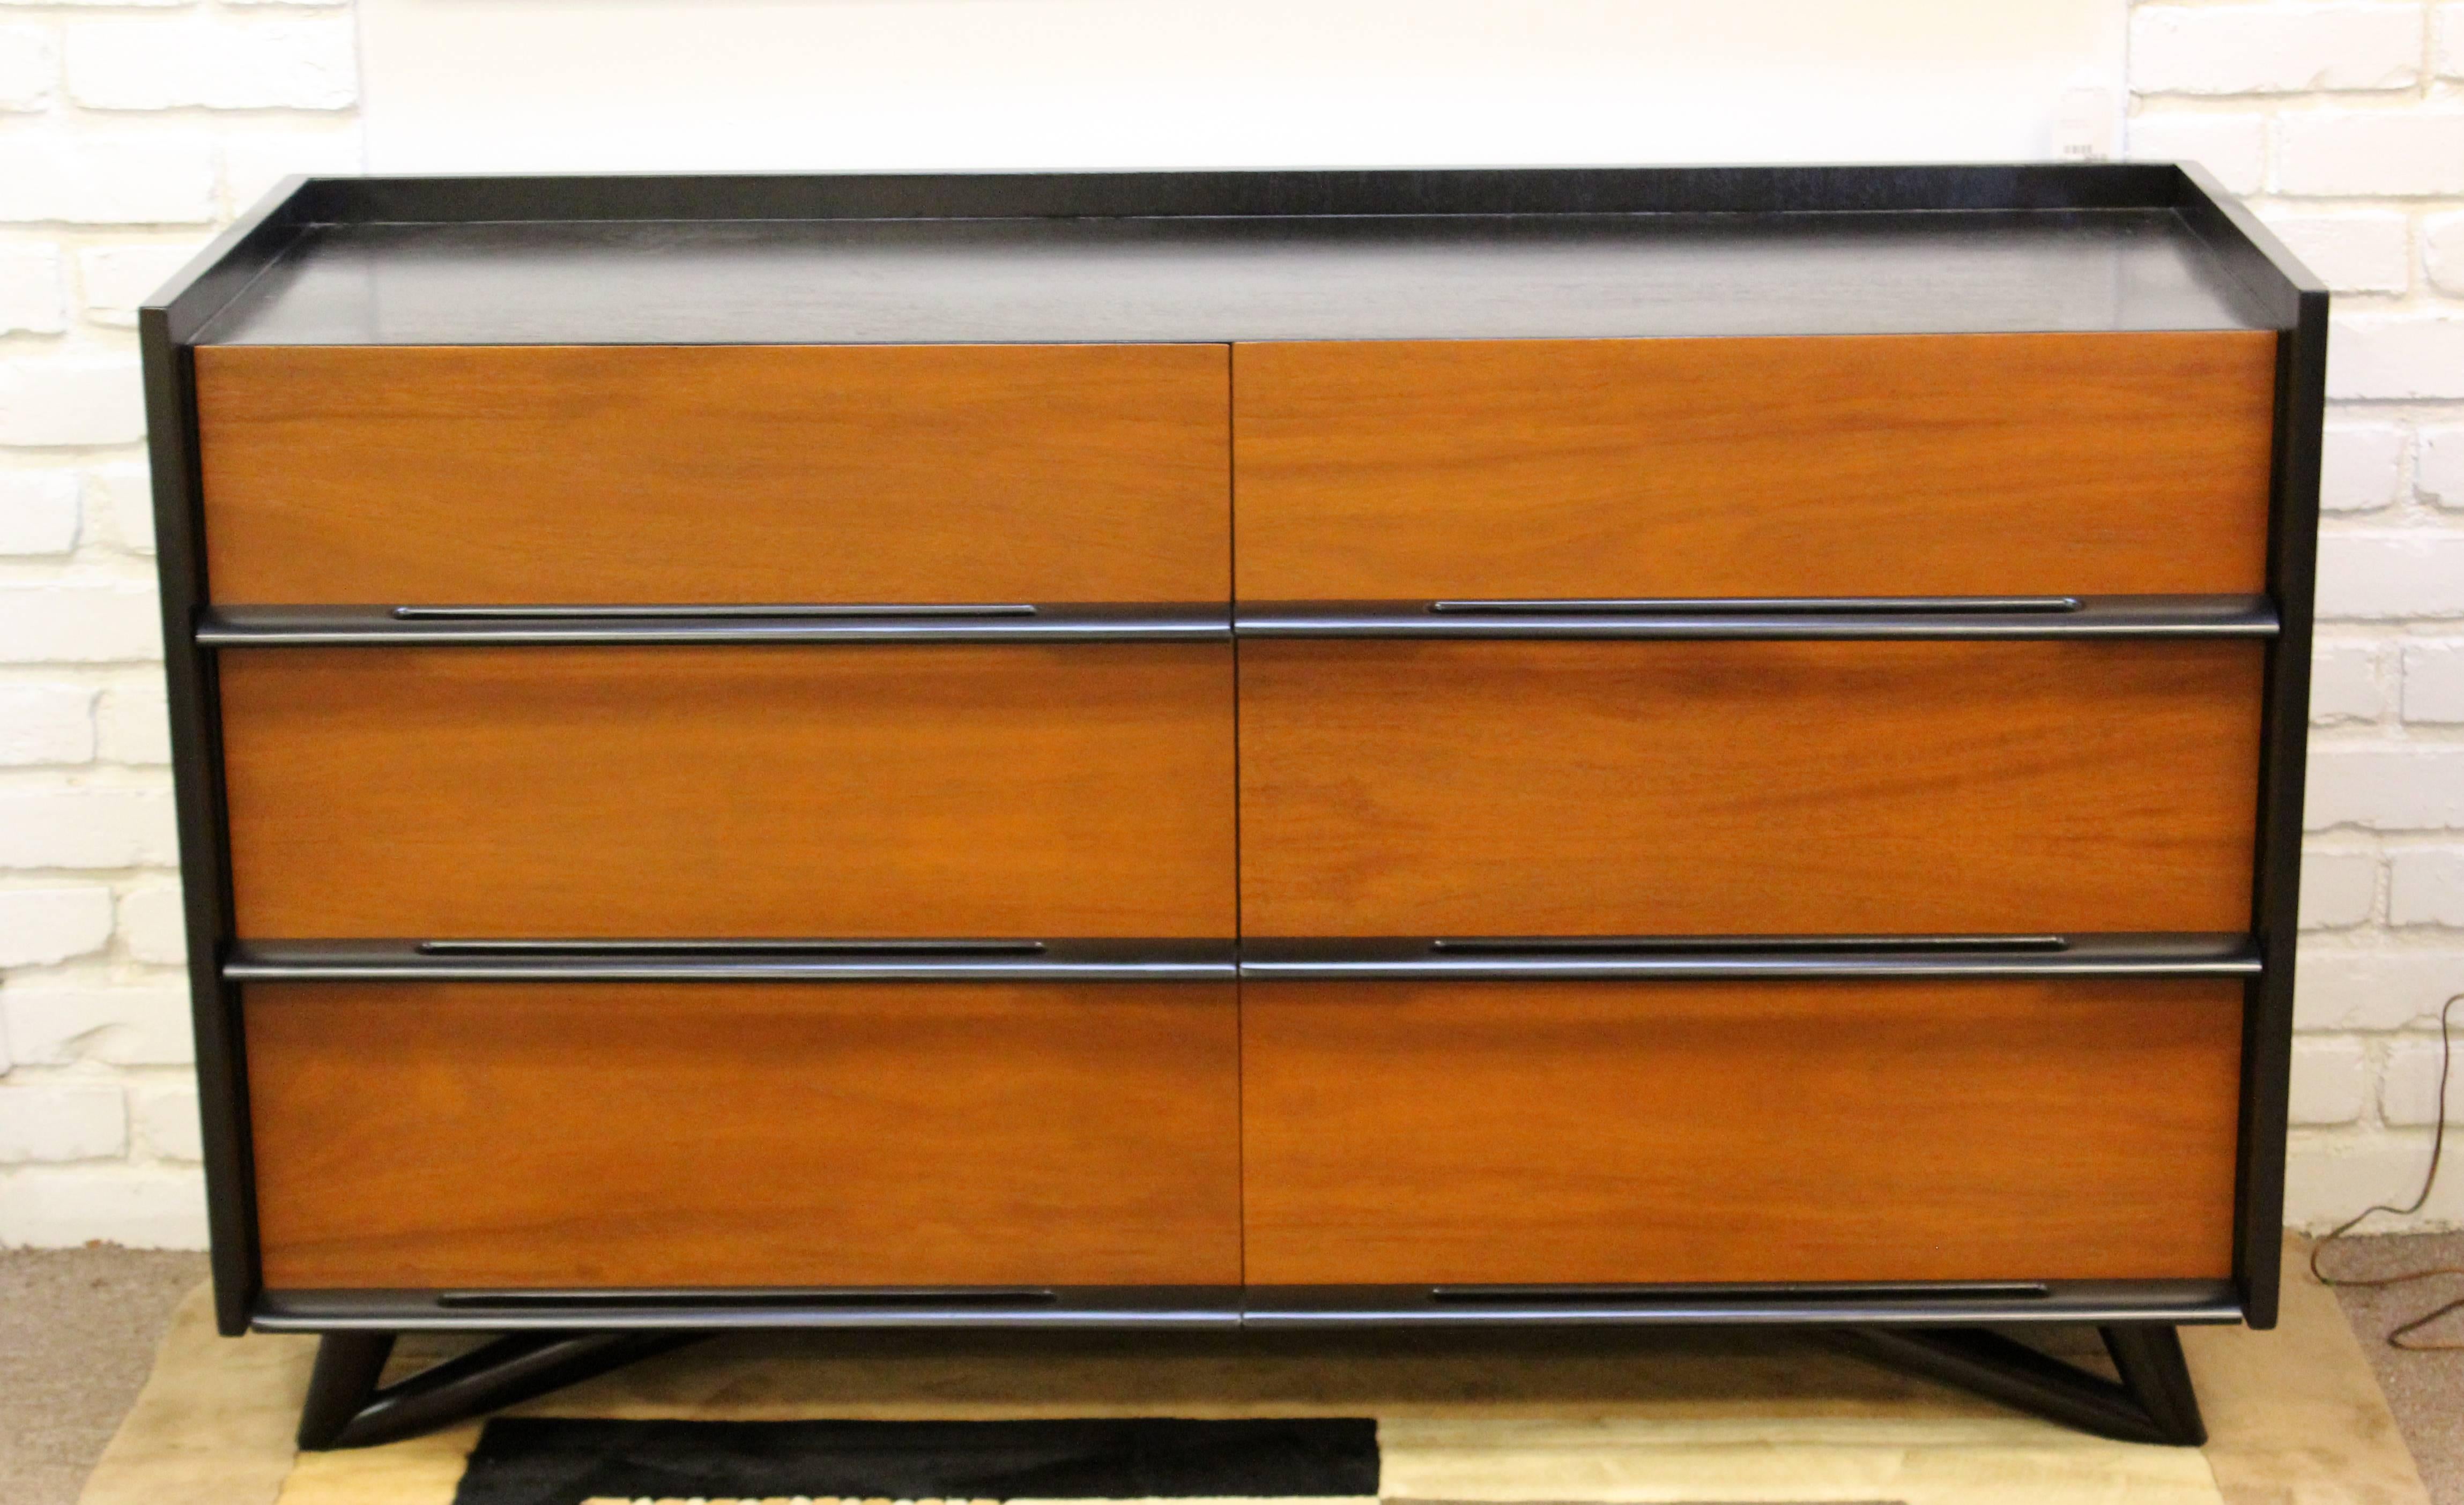 For your consideration is a magnificent dresser or credenza, walnut wood with black lacquered top and sides and six drawers, by Robinson Furniture, in the style of Eero Saarinen, circa 1950s. In excellent condition. Professionally refinished. The